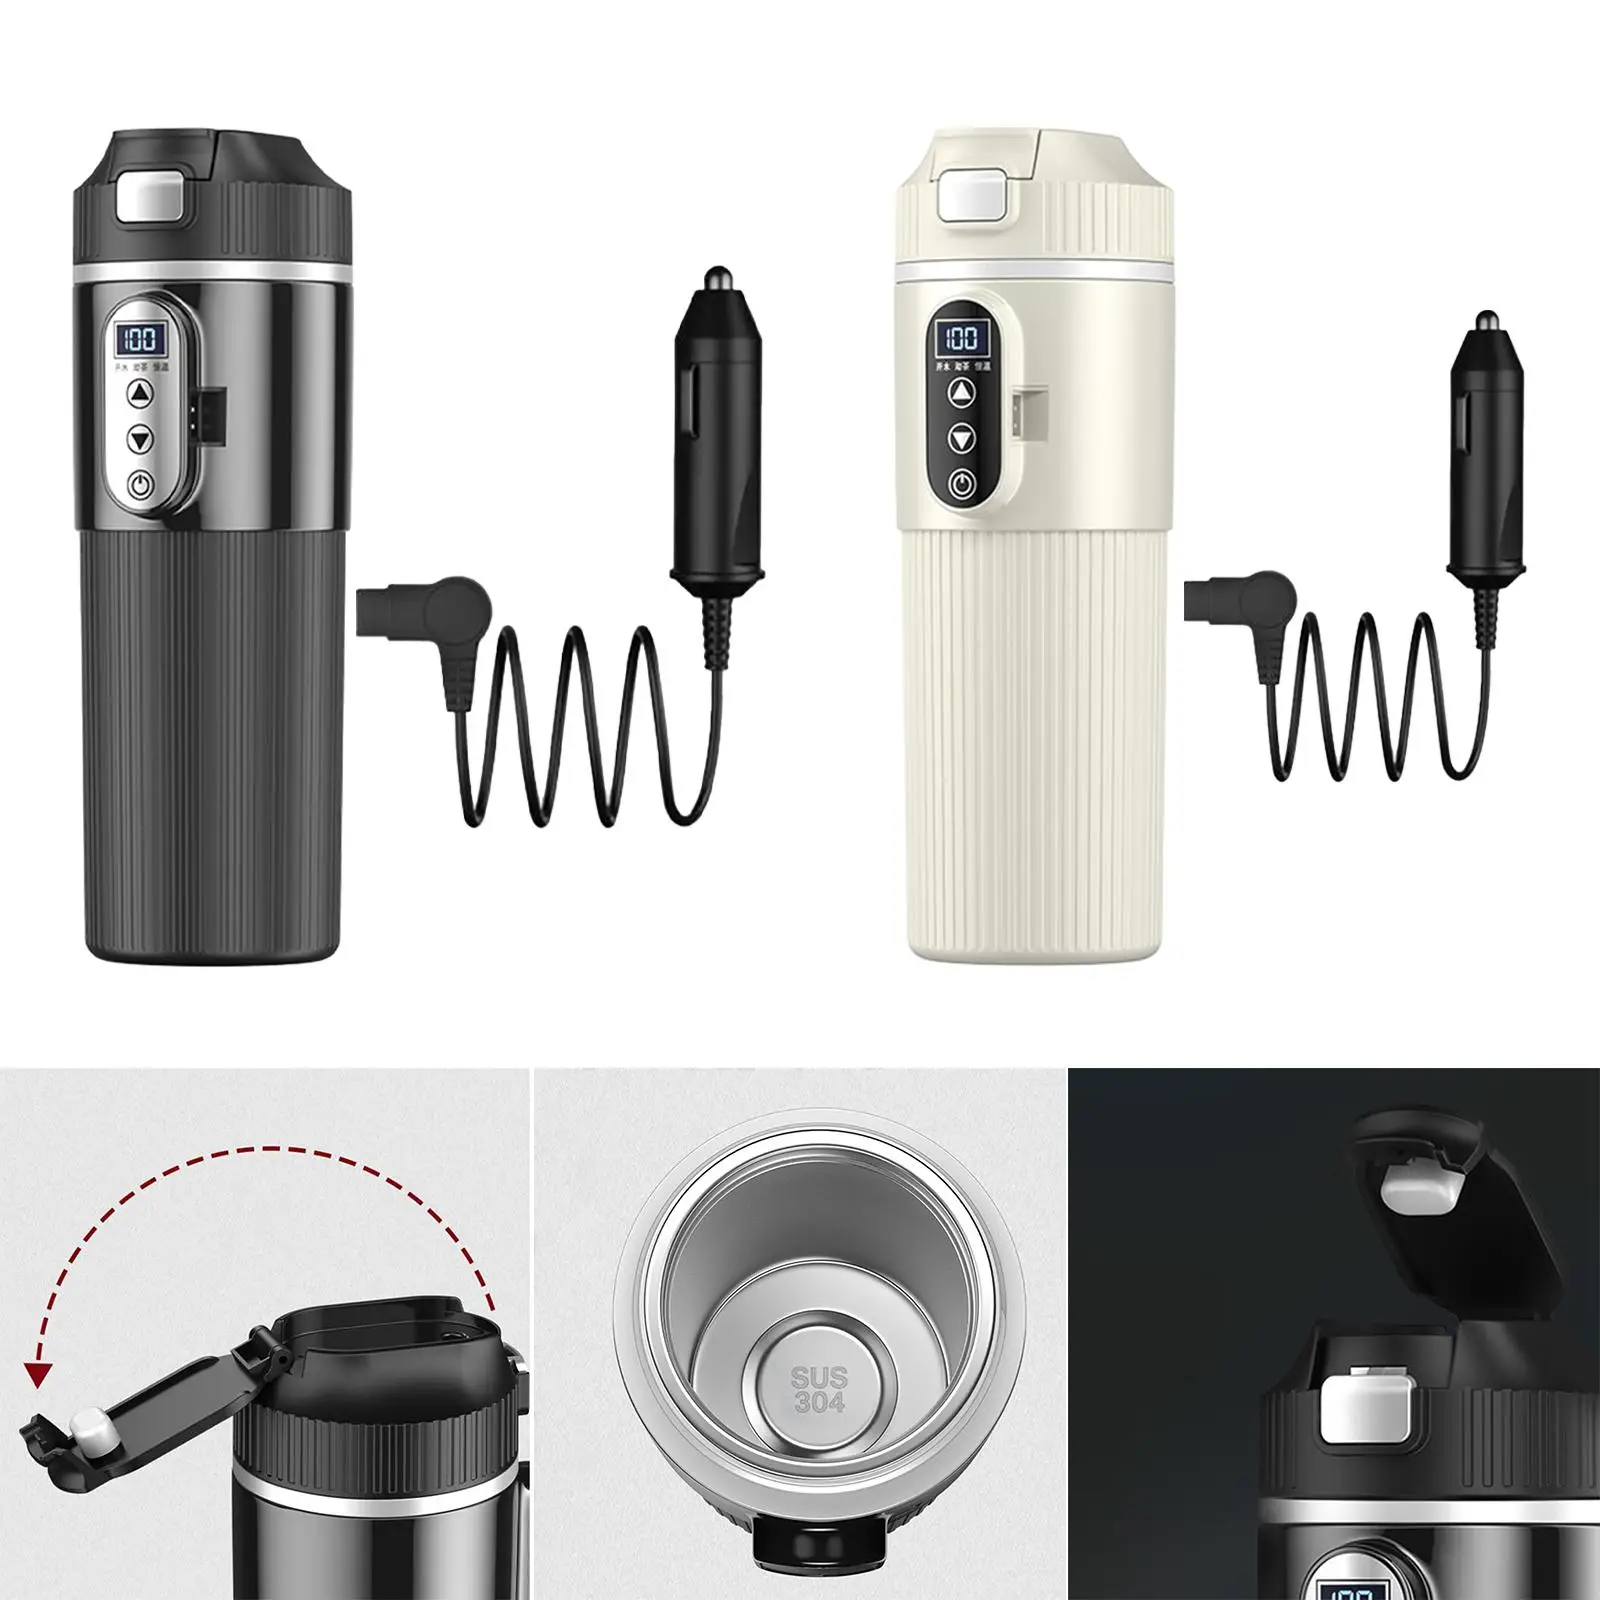 Car Heating Cup Cold Water 500ml Stainless Steel Electric Heat Water Cup for Tea Heating Water Beverage Brewing Coffee Work